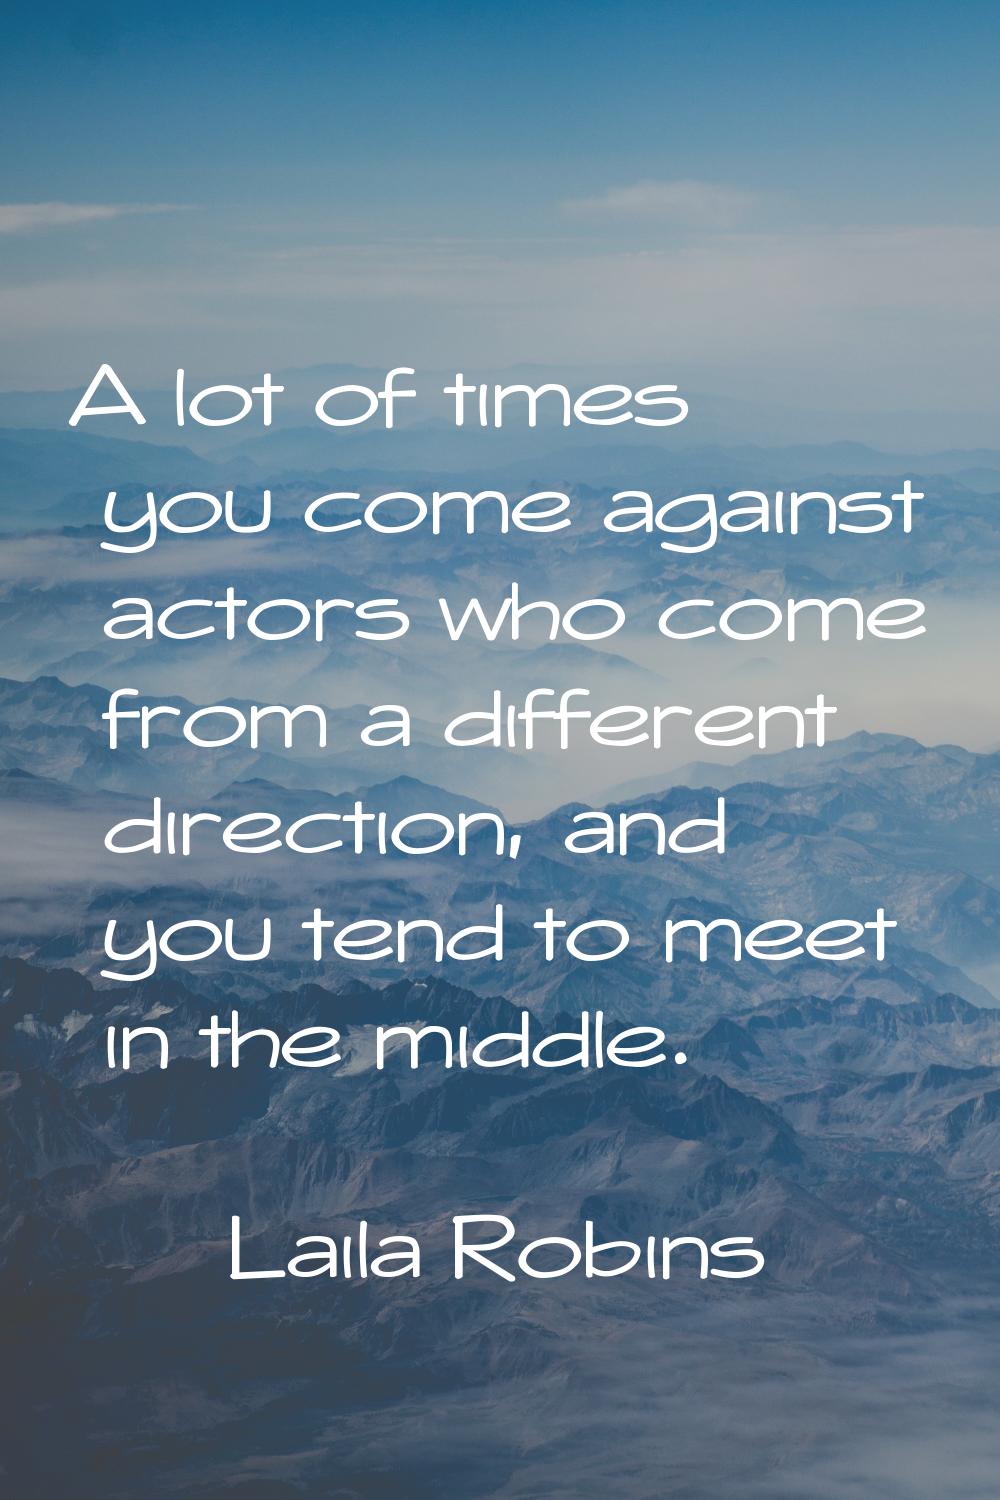 A lot of times you come against actors who come from a different direction, and you tend to meet in